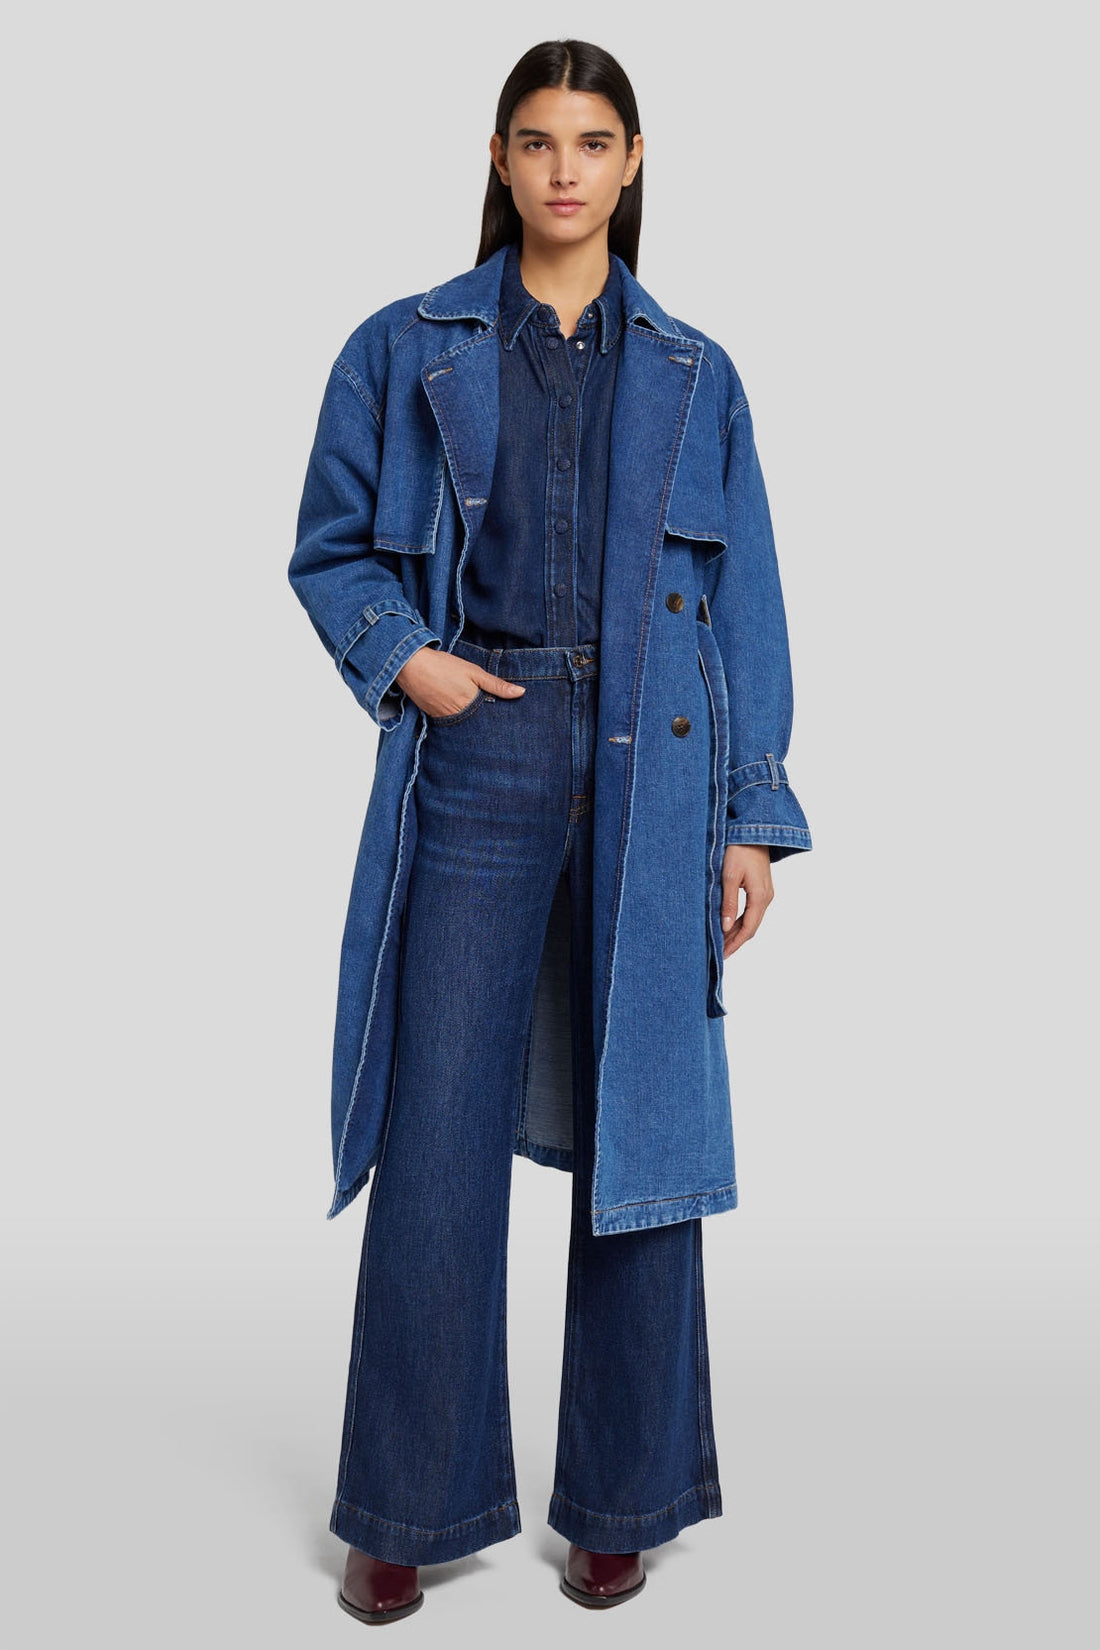 Tailored Denim Trench Calla_JSUSC370CL_CL_02